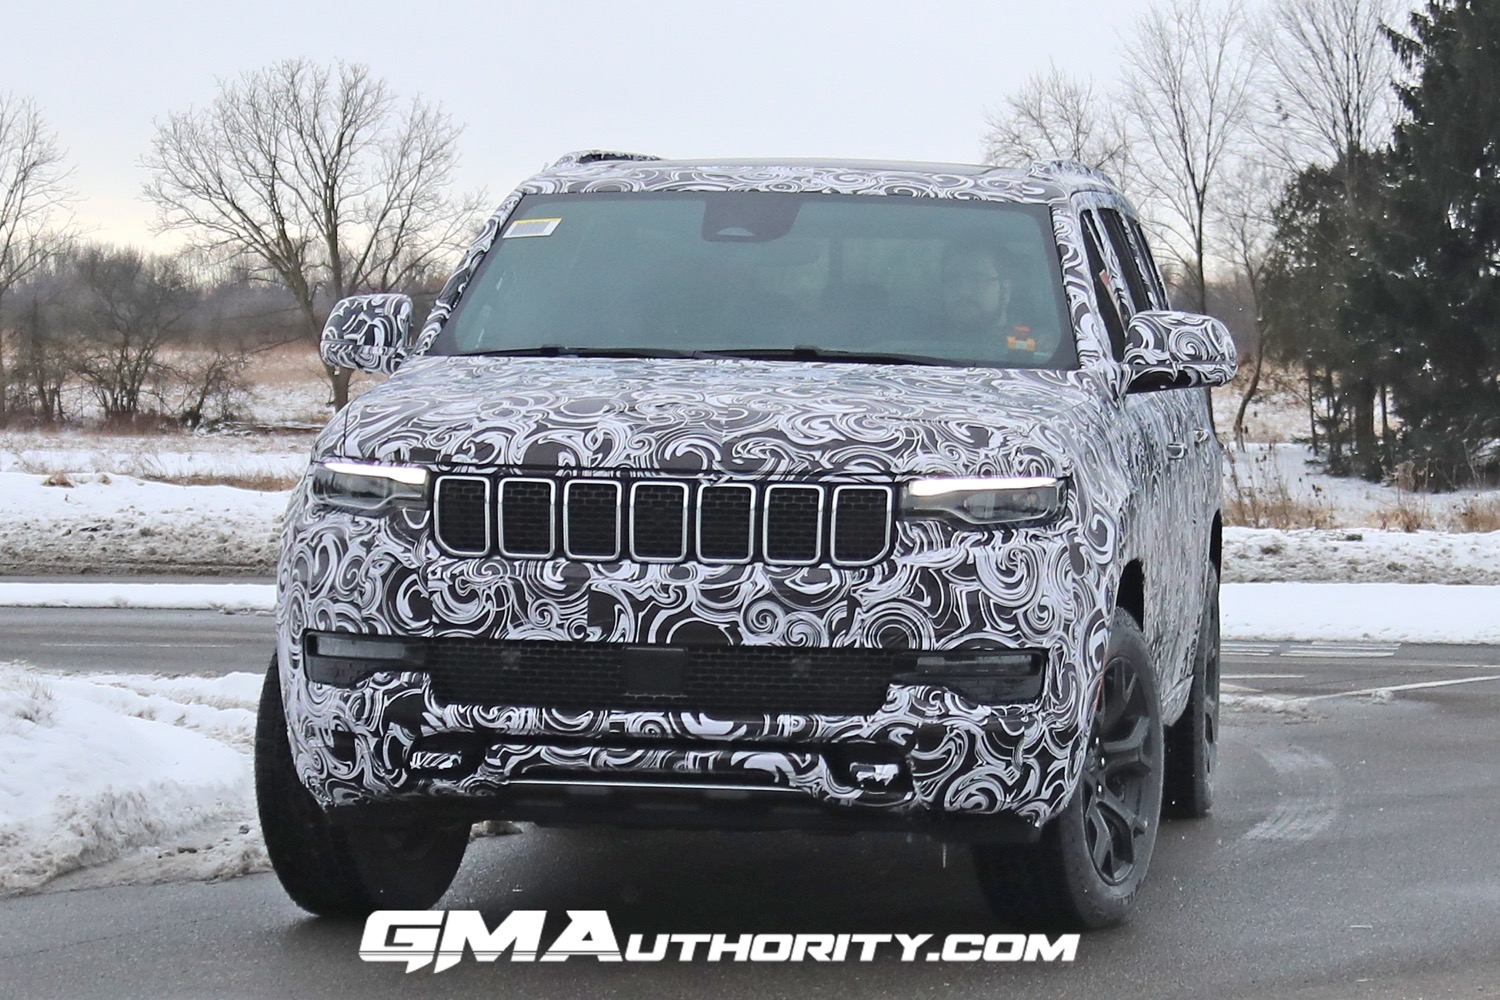 Extended-Length Jeep Wagoneer Caught Testing